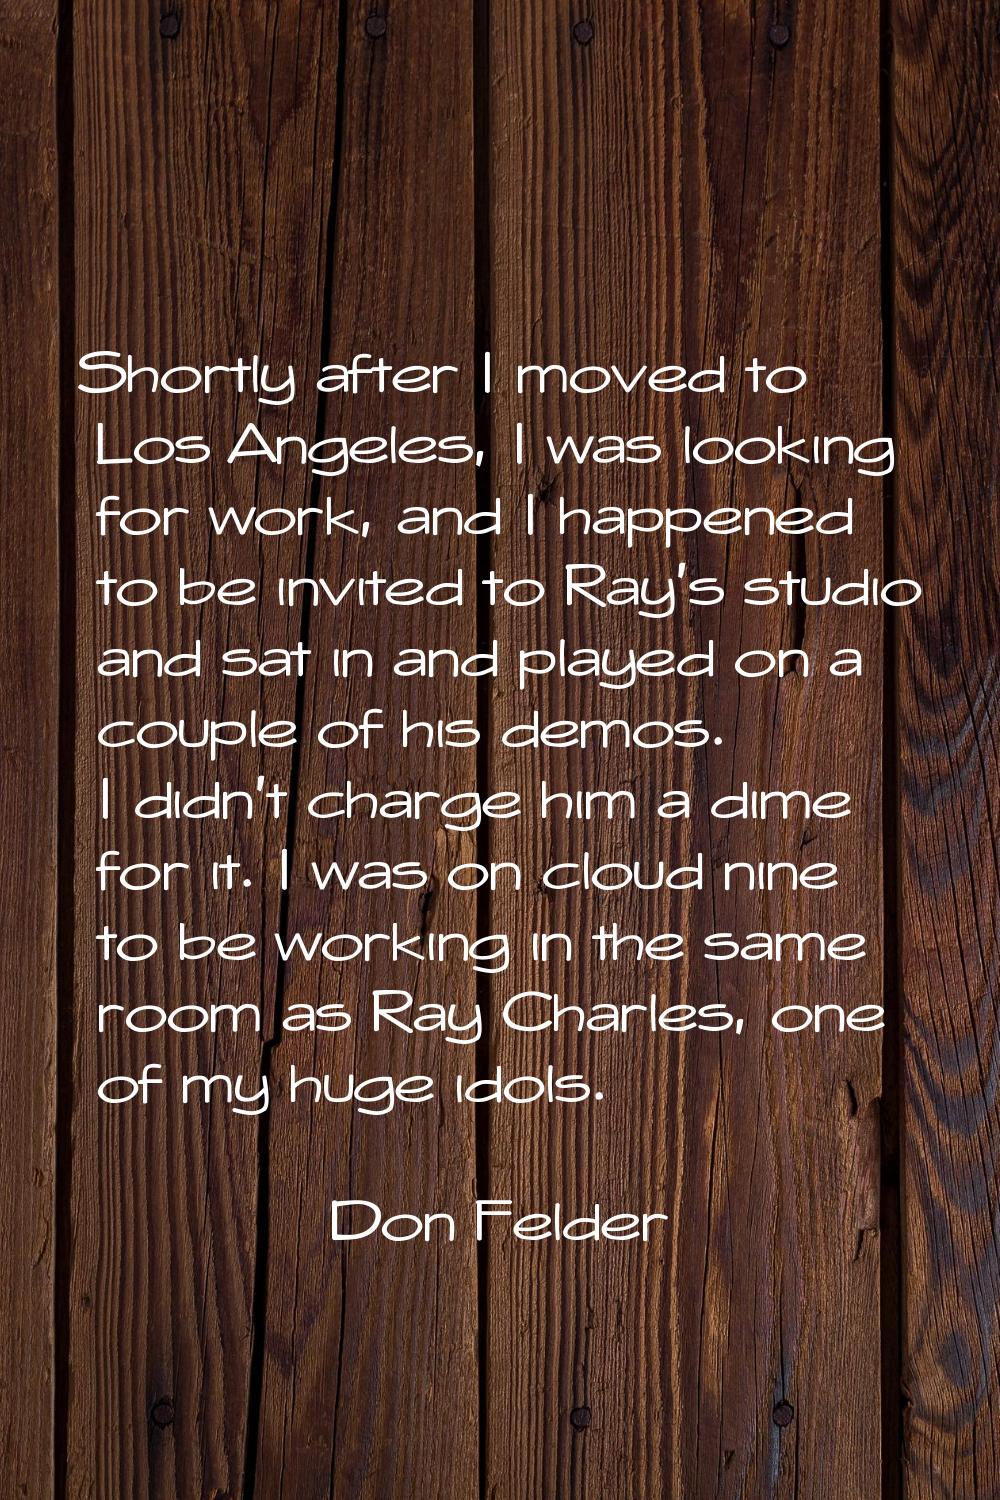 Shortly after I moved to Los Angeles, I was looking for work, and I happened to be invited to Ray's